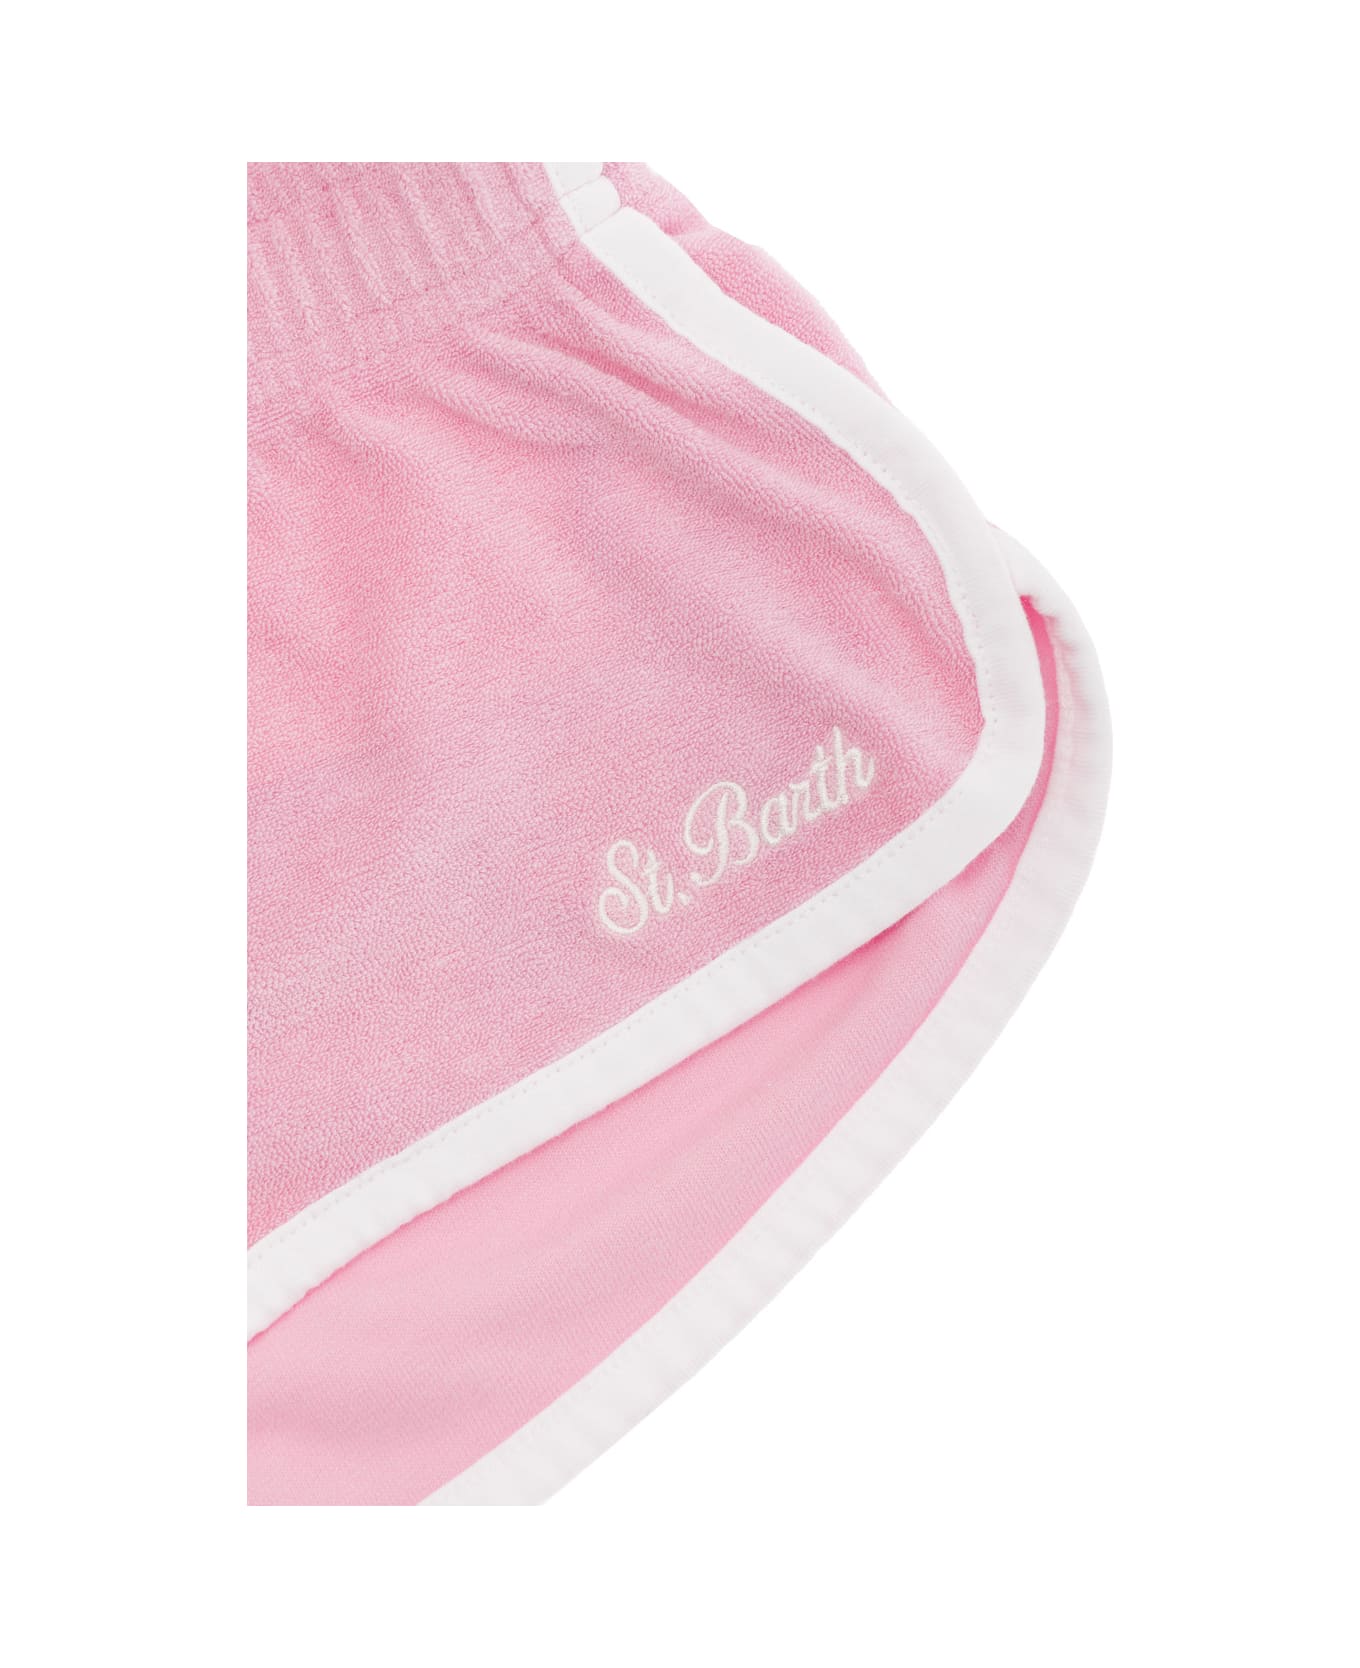 MC2 Saint Barth Pink Shorts With Logo Lettering Embroidery In Cotton Blend Girl - Pink